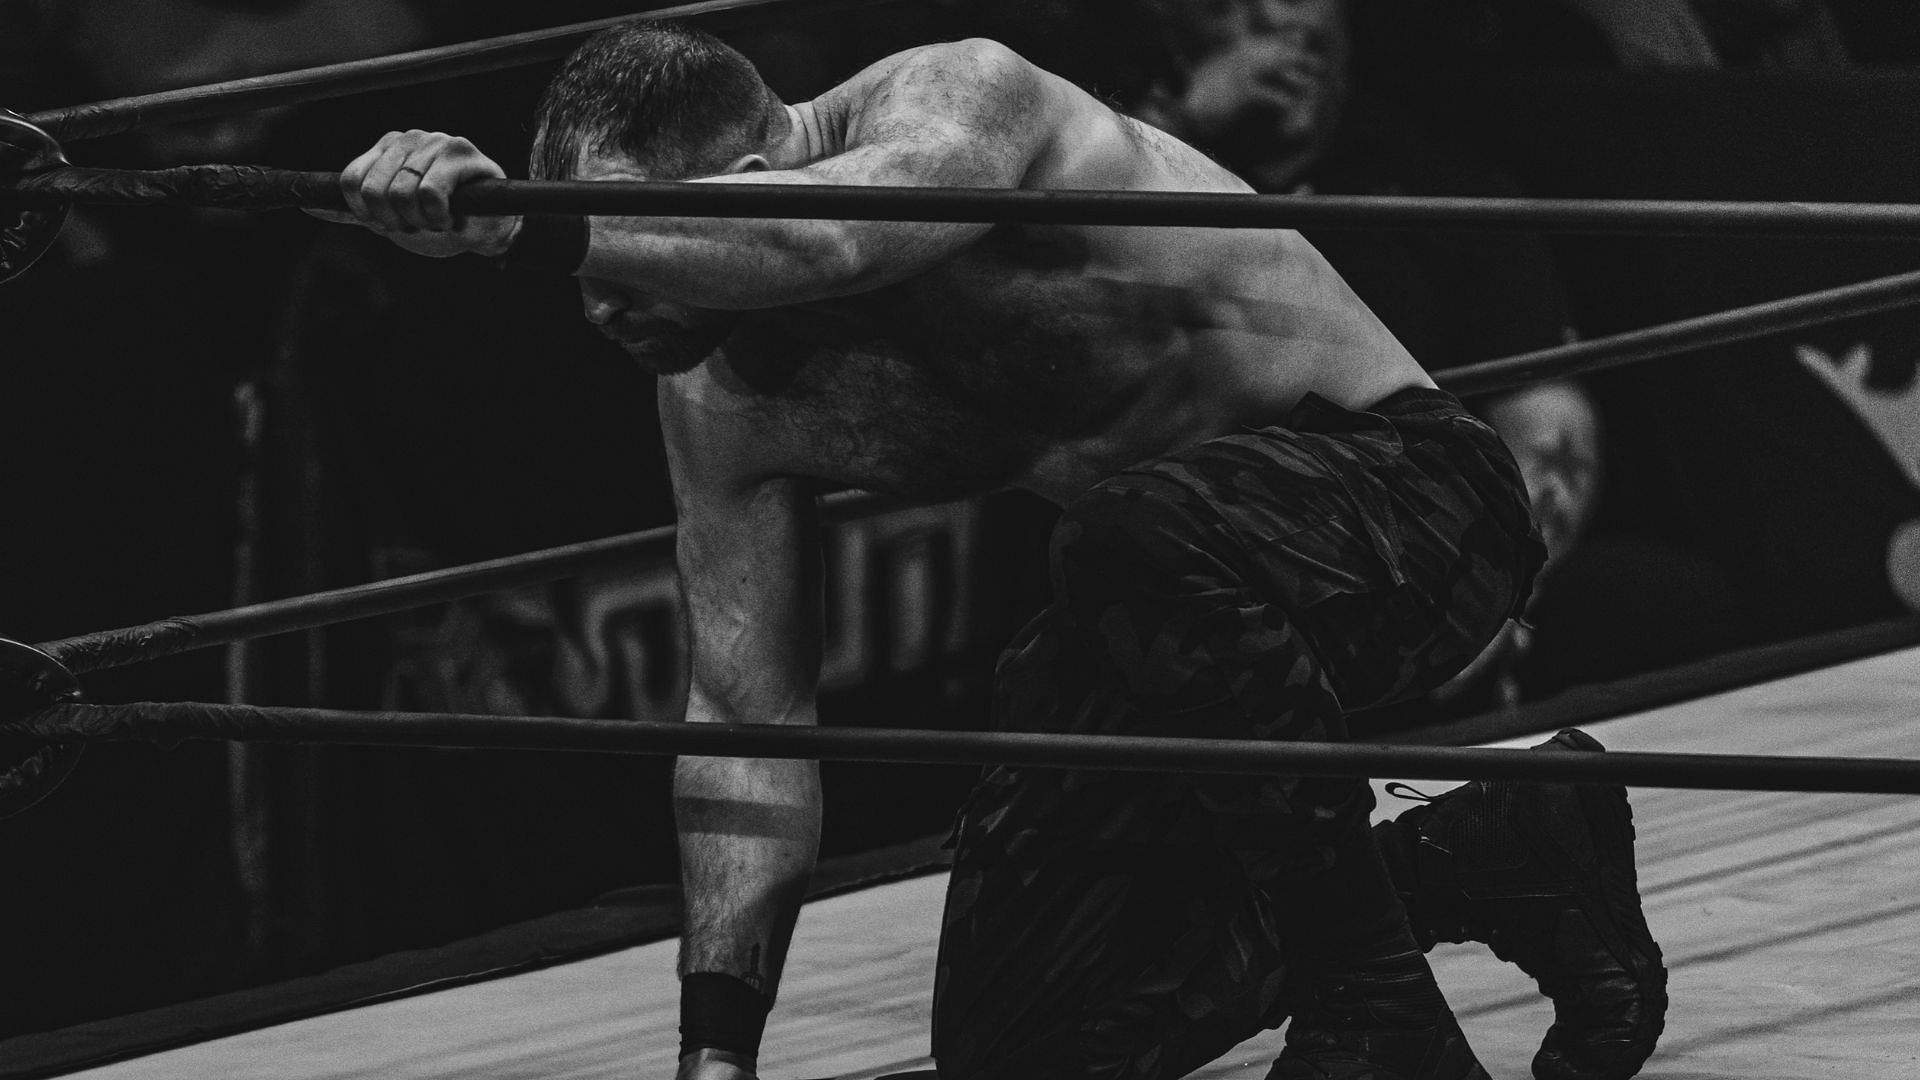 Jon Moxley at AEW Revolution 2022 (Credit: Jay Lee Photography)